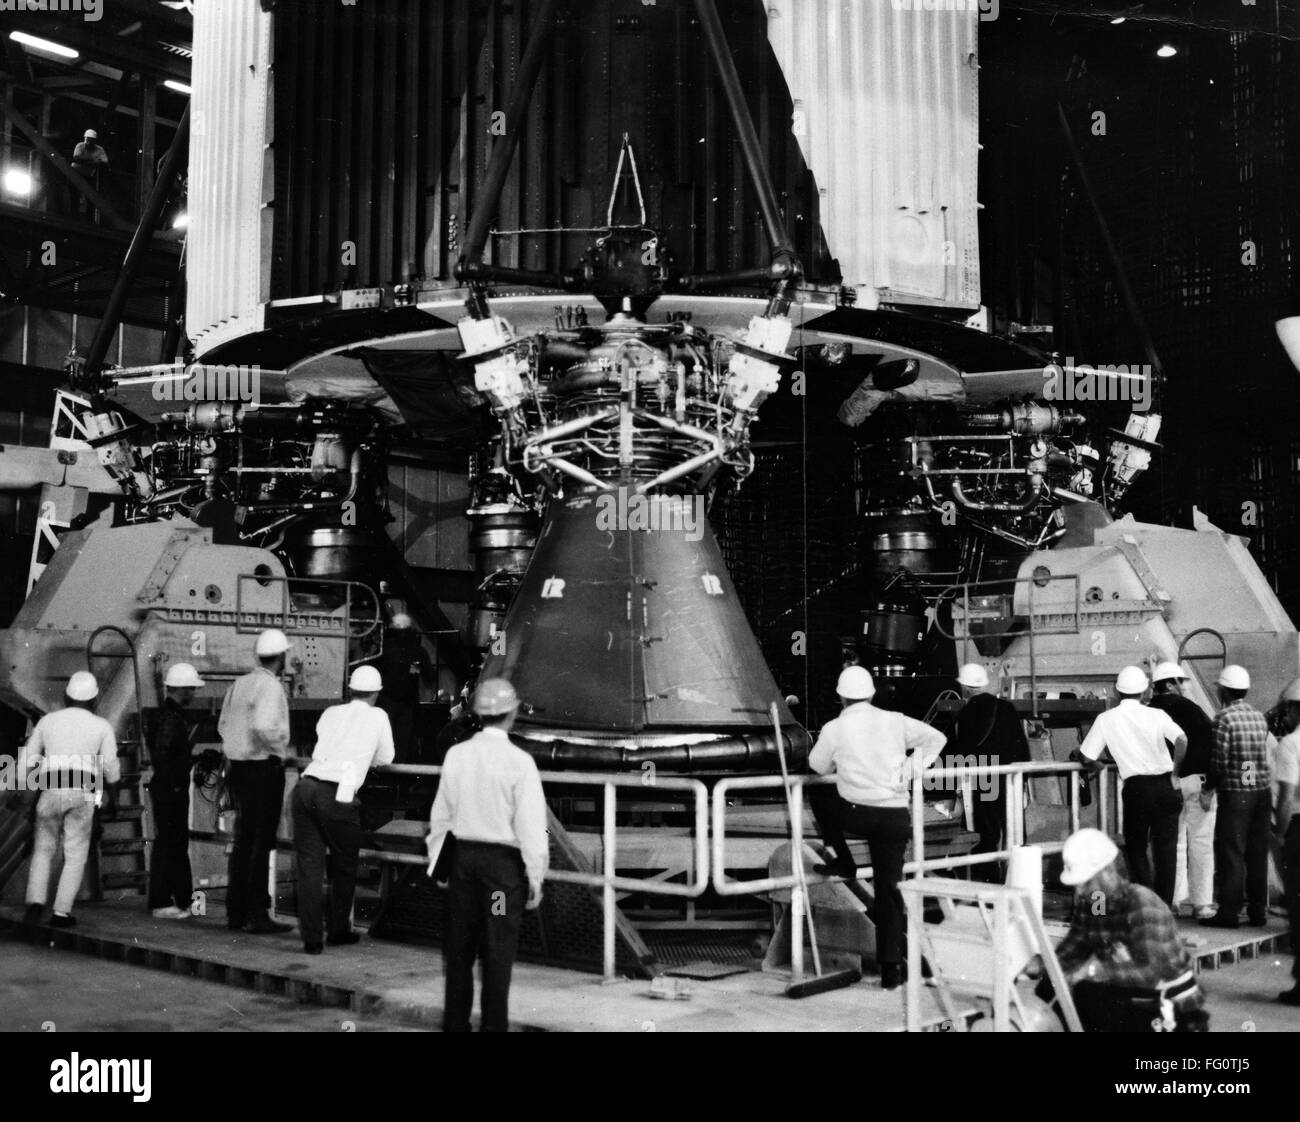 APOLLO 8: SATURN V ROCKET. /nEngineers checking the Saturn V first stage rocket at the Vehicle Assembly Building at Kennedy Space Center in Florida, prior to the launch of the Apollo 8 mission. Photograph, 1968. Stock Photo